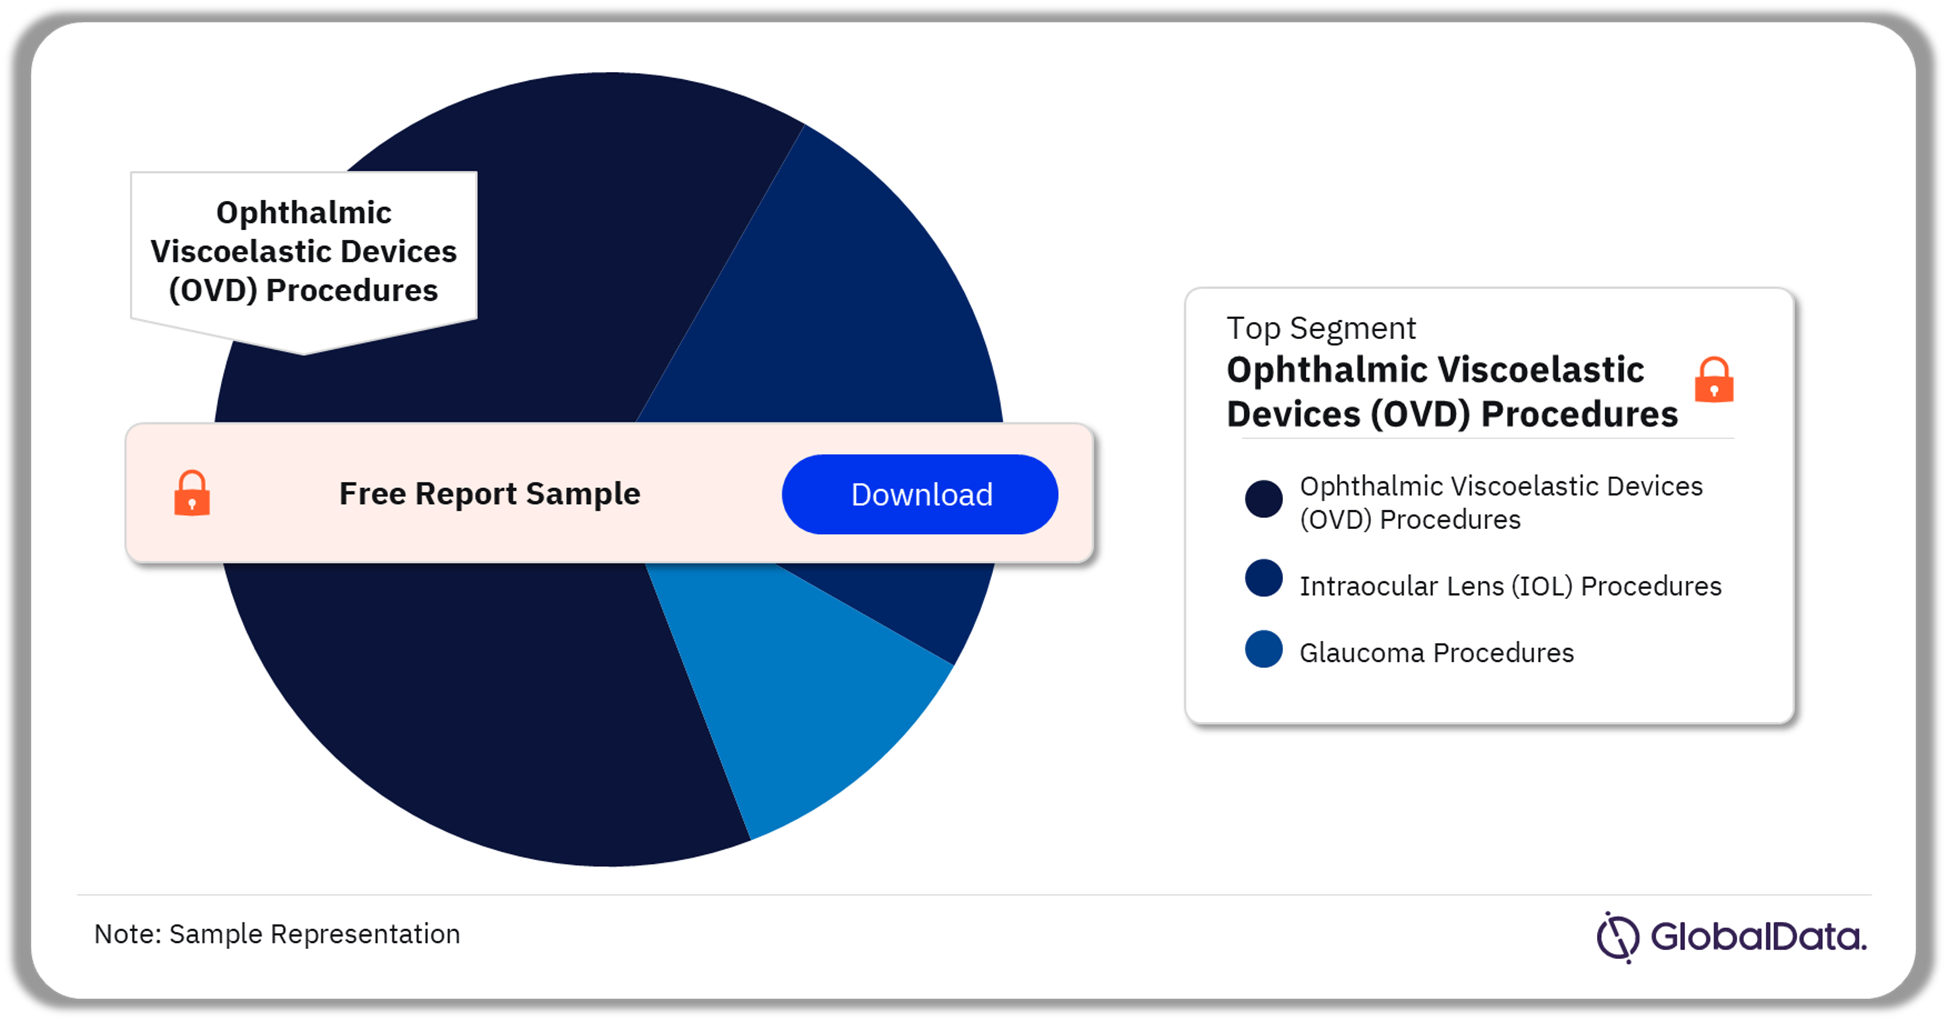 US Ophthalmic Procedures Market Analysis by Segments, 2022 (%)